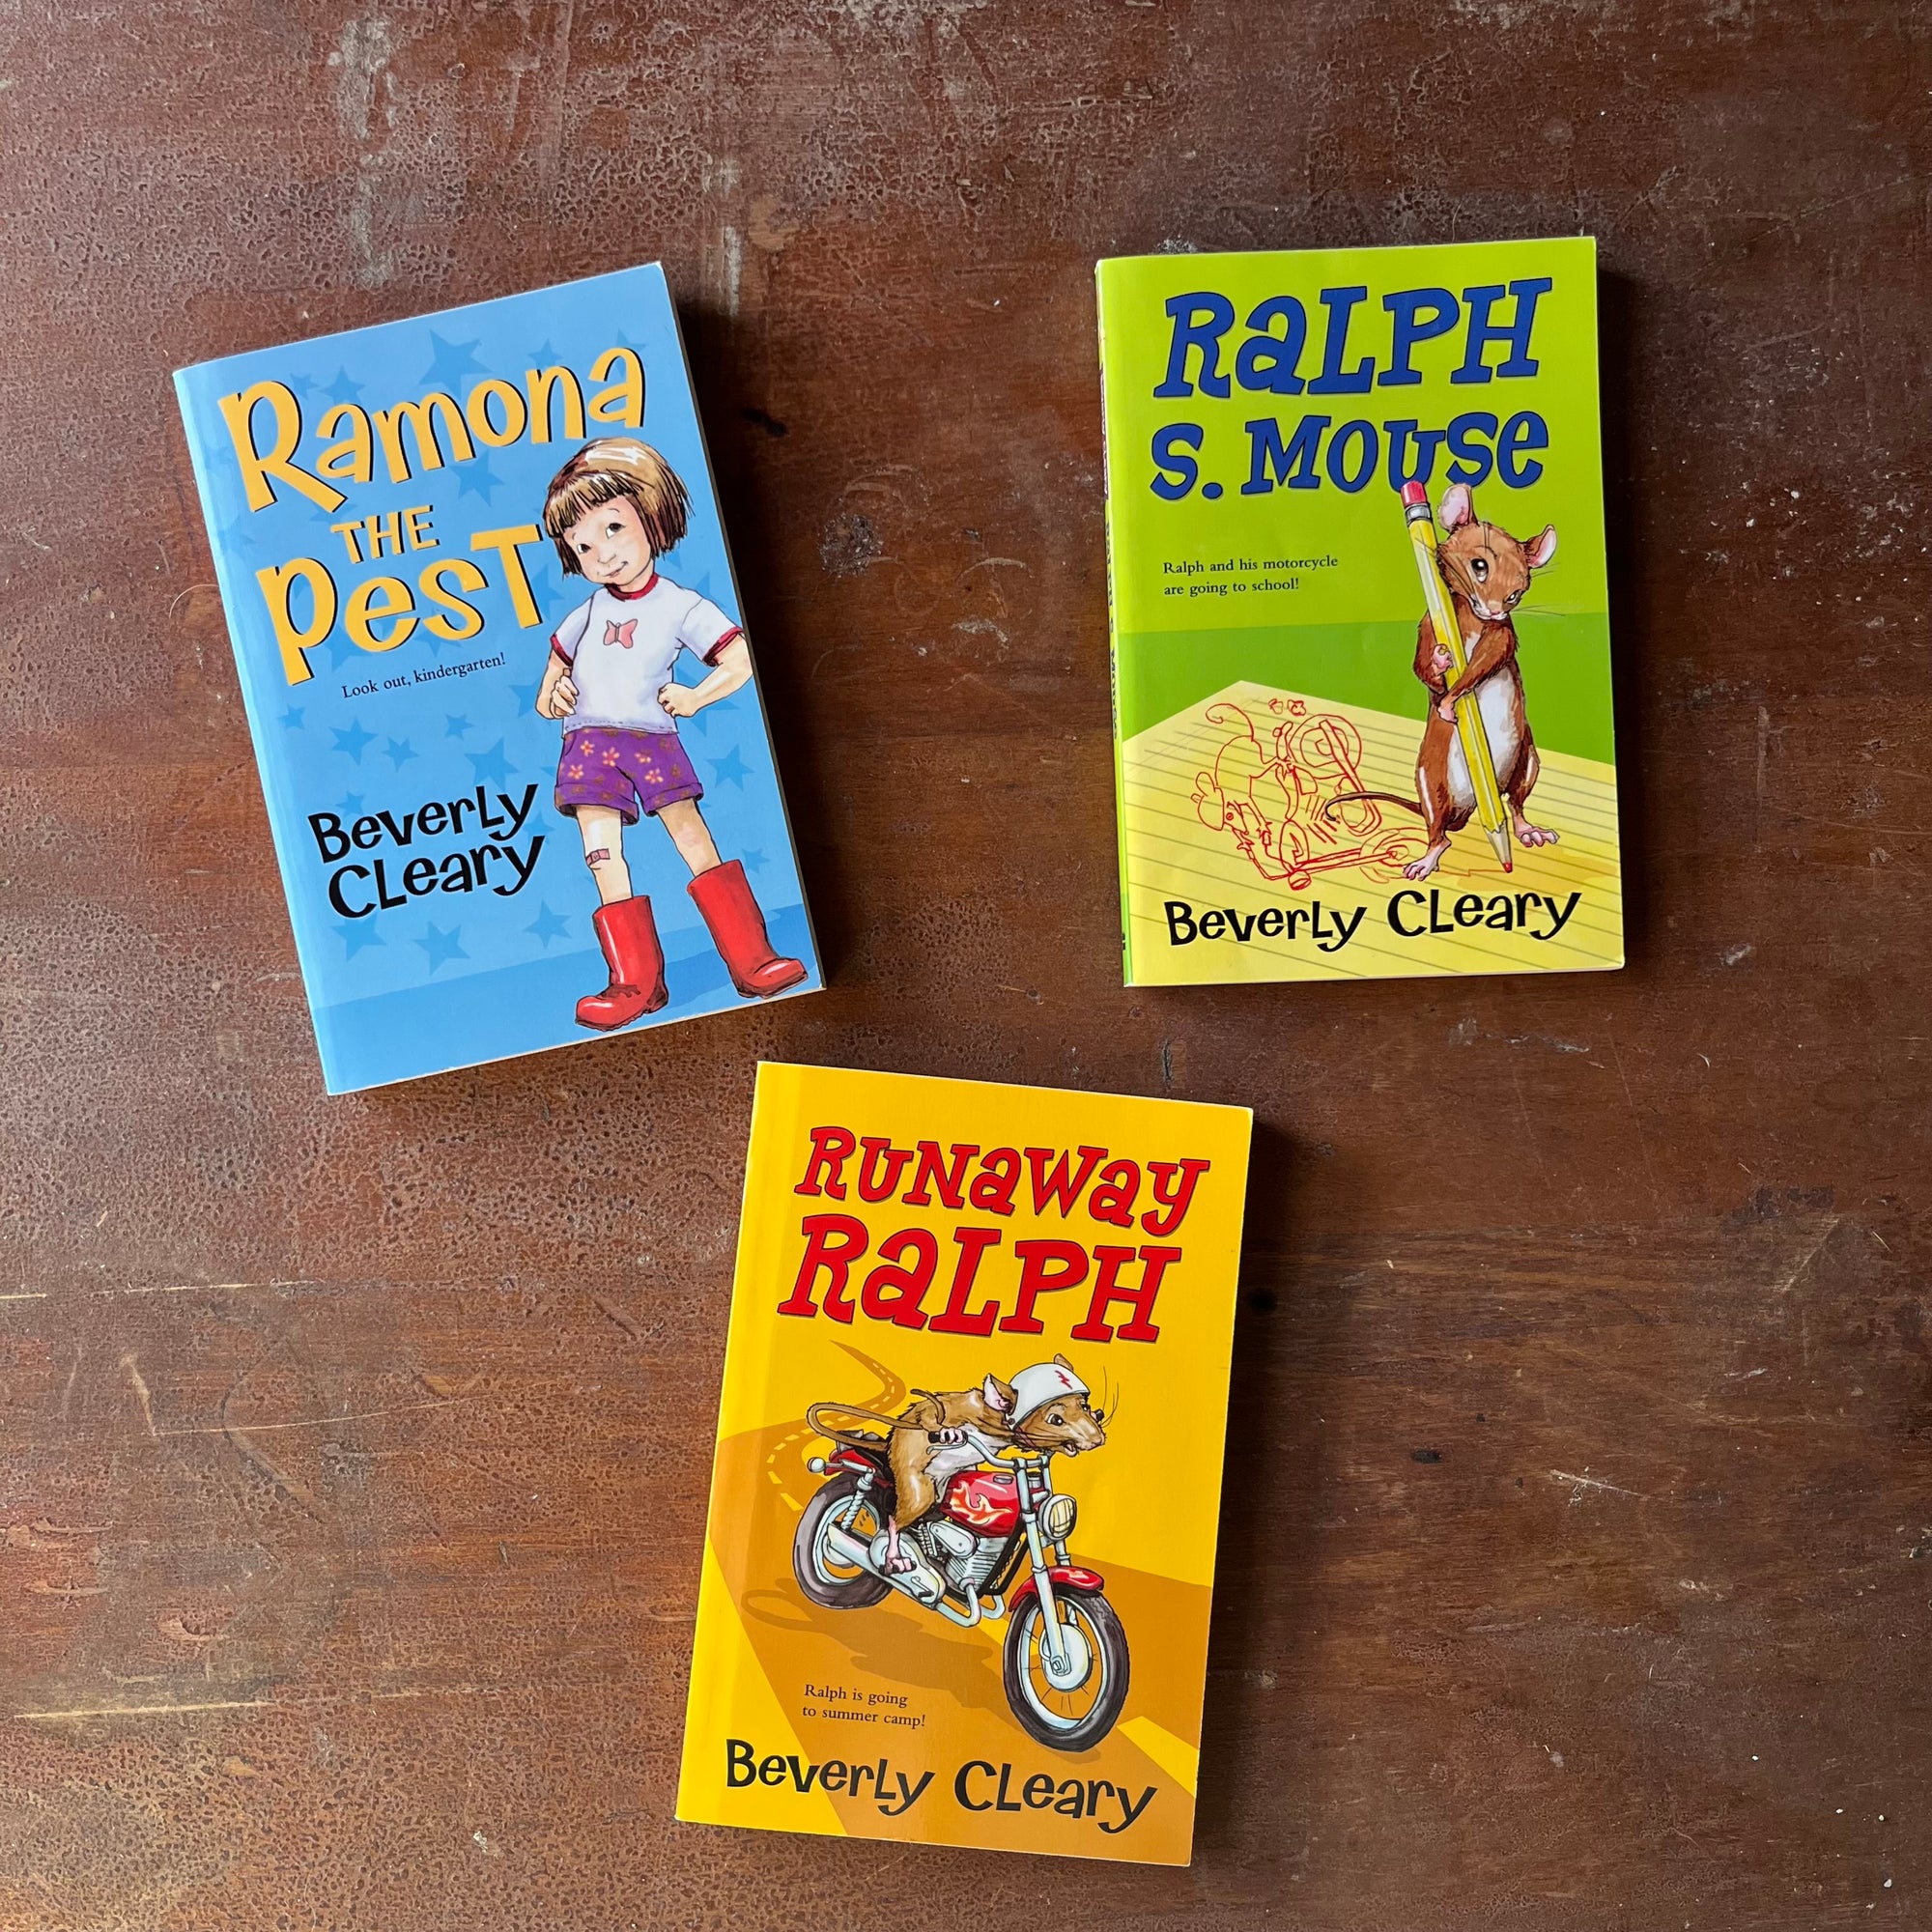 Beverly Cleary Book Set:  Ramona The Pest, Ralph S. Mouse, and Runaway Ralph-illustrated by Tracy Dockray-view of the bright & colorful front covers featuring an illustration of each main character